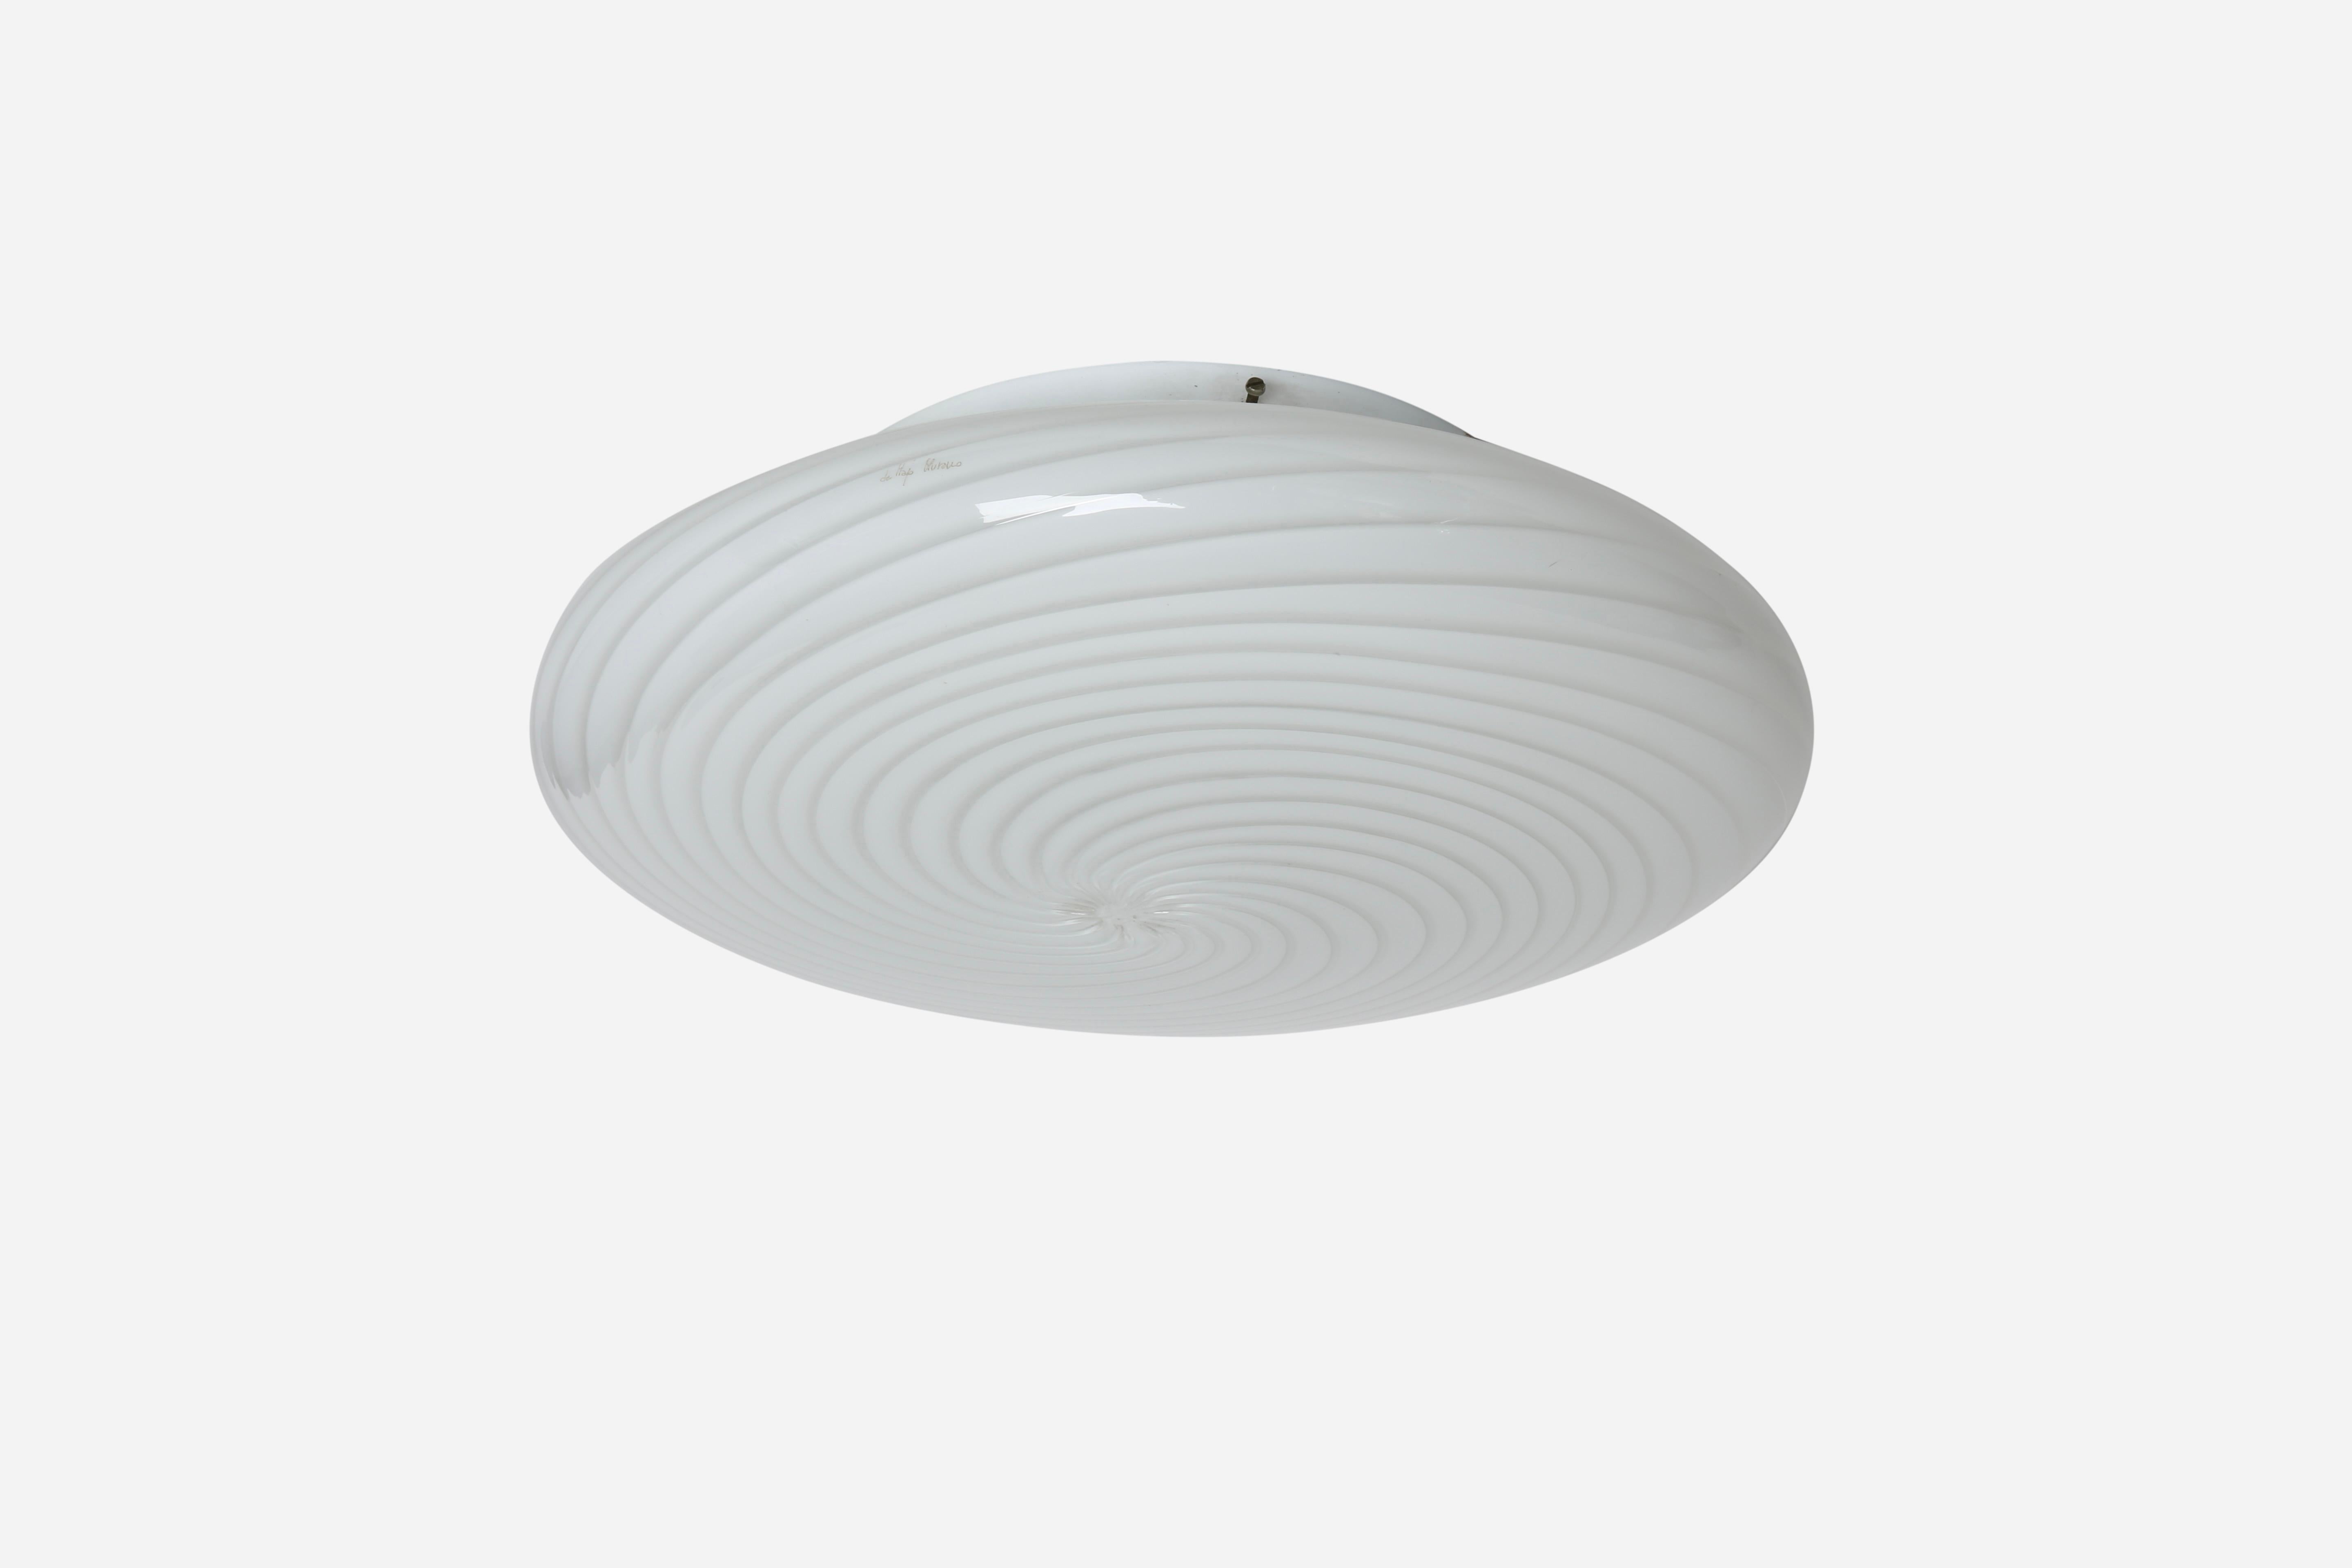 Murano glass flush mount ceiling light, large.
Made in Italy in 1960s.
Takes 2 Edison bulbs.
Complimentary US rewiring upon request.

We take pride in bringing vintage fixtures to their full glory again.
At Illustris Lighting our main focus is to